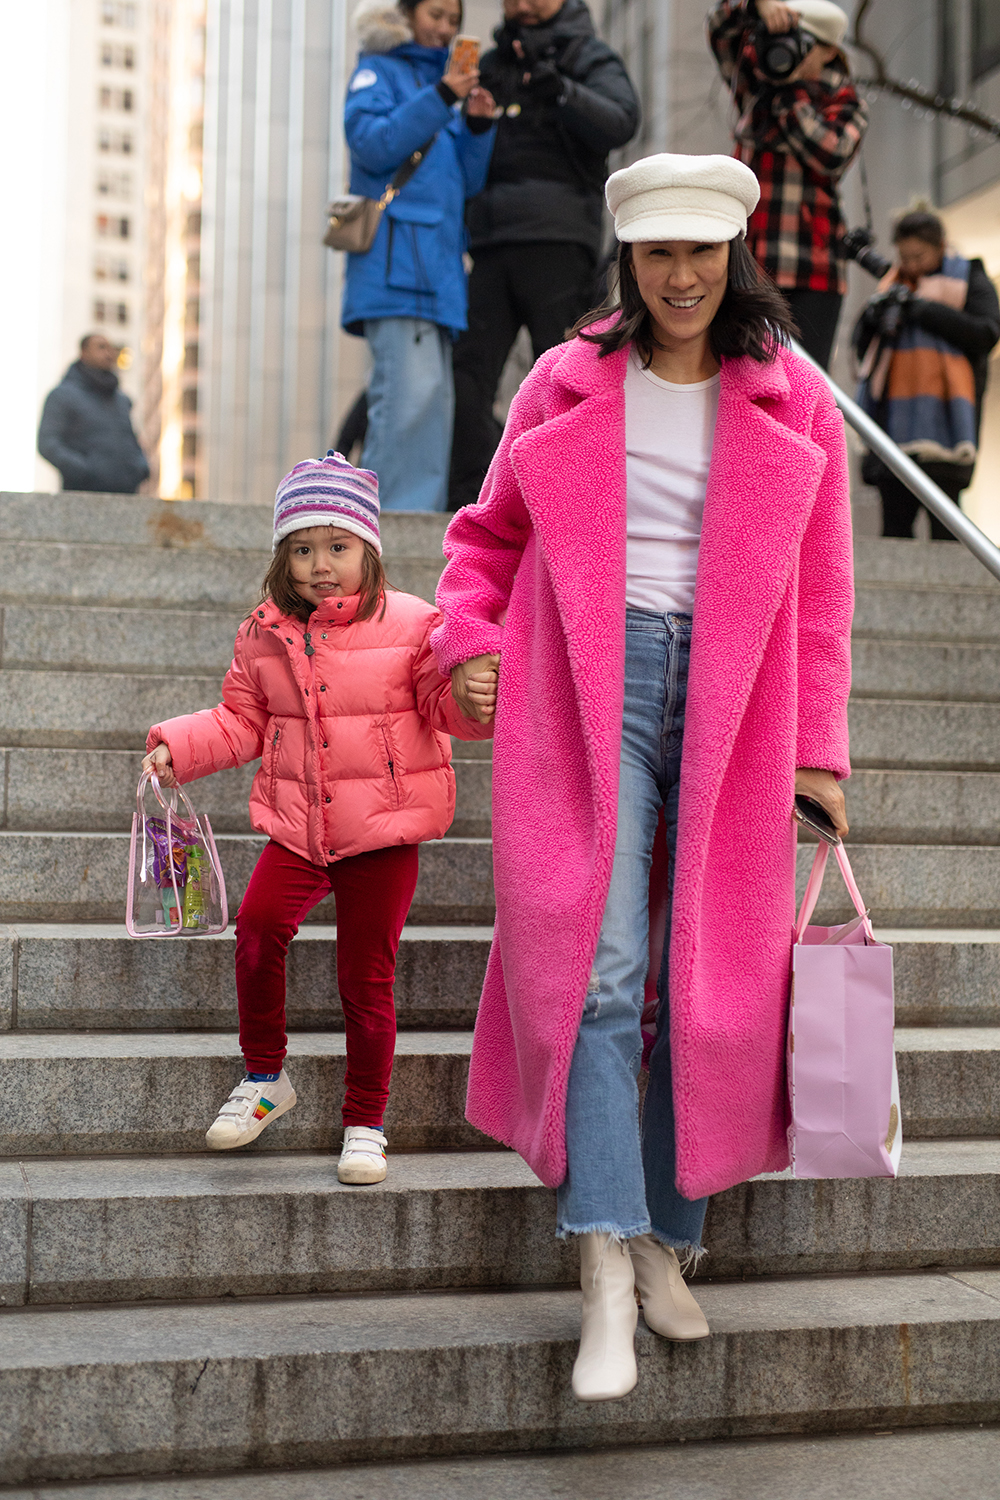 NEW YORK, NEW YORK - FEBRUARY 09: Eva Chen and her daughter Ren are seen on the street during New York Fashion Week AW19 on February 09, 2019 in New York City. (Photo by Matthew Sperzel/Getty Images)